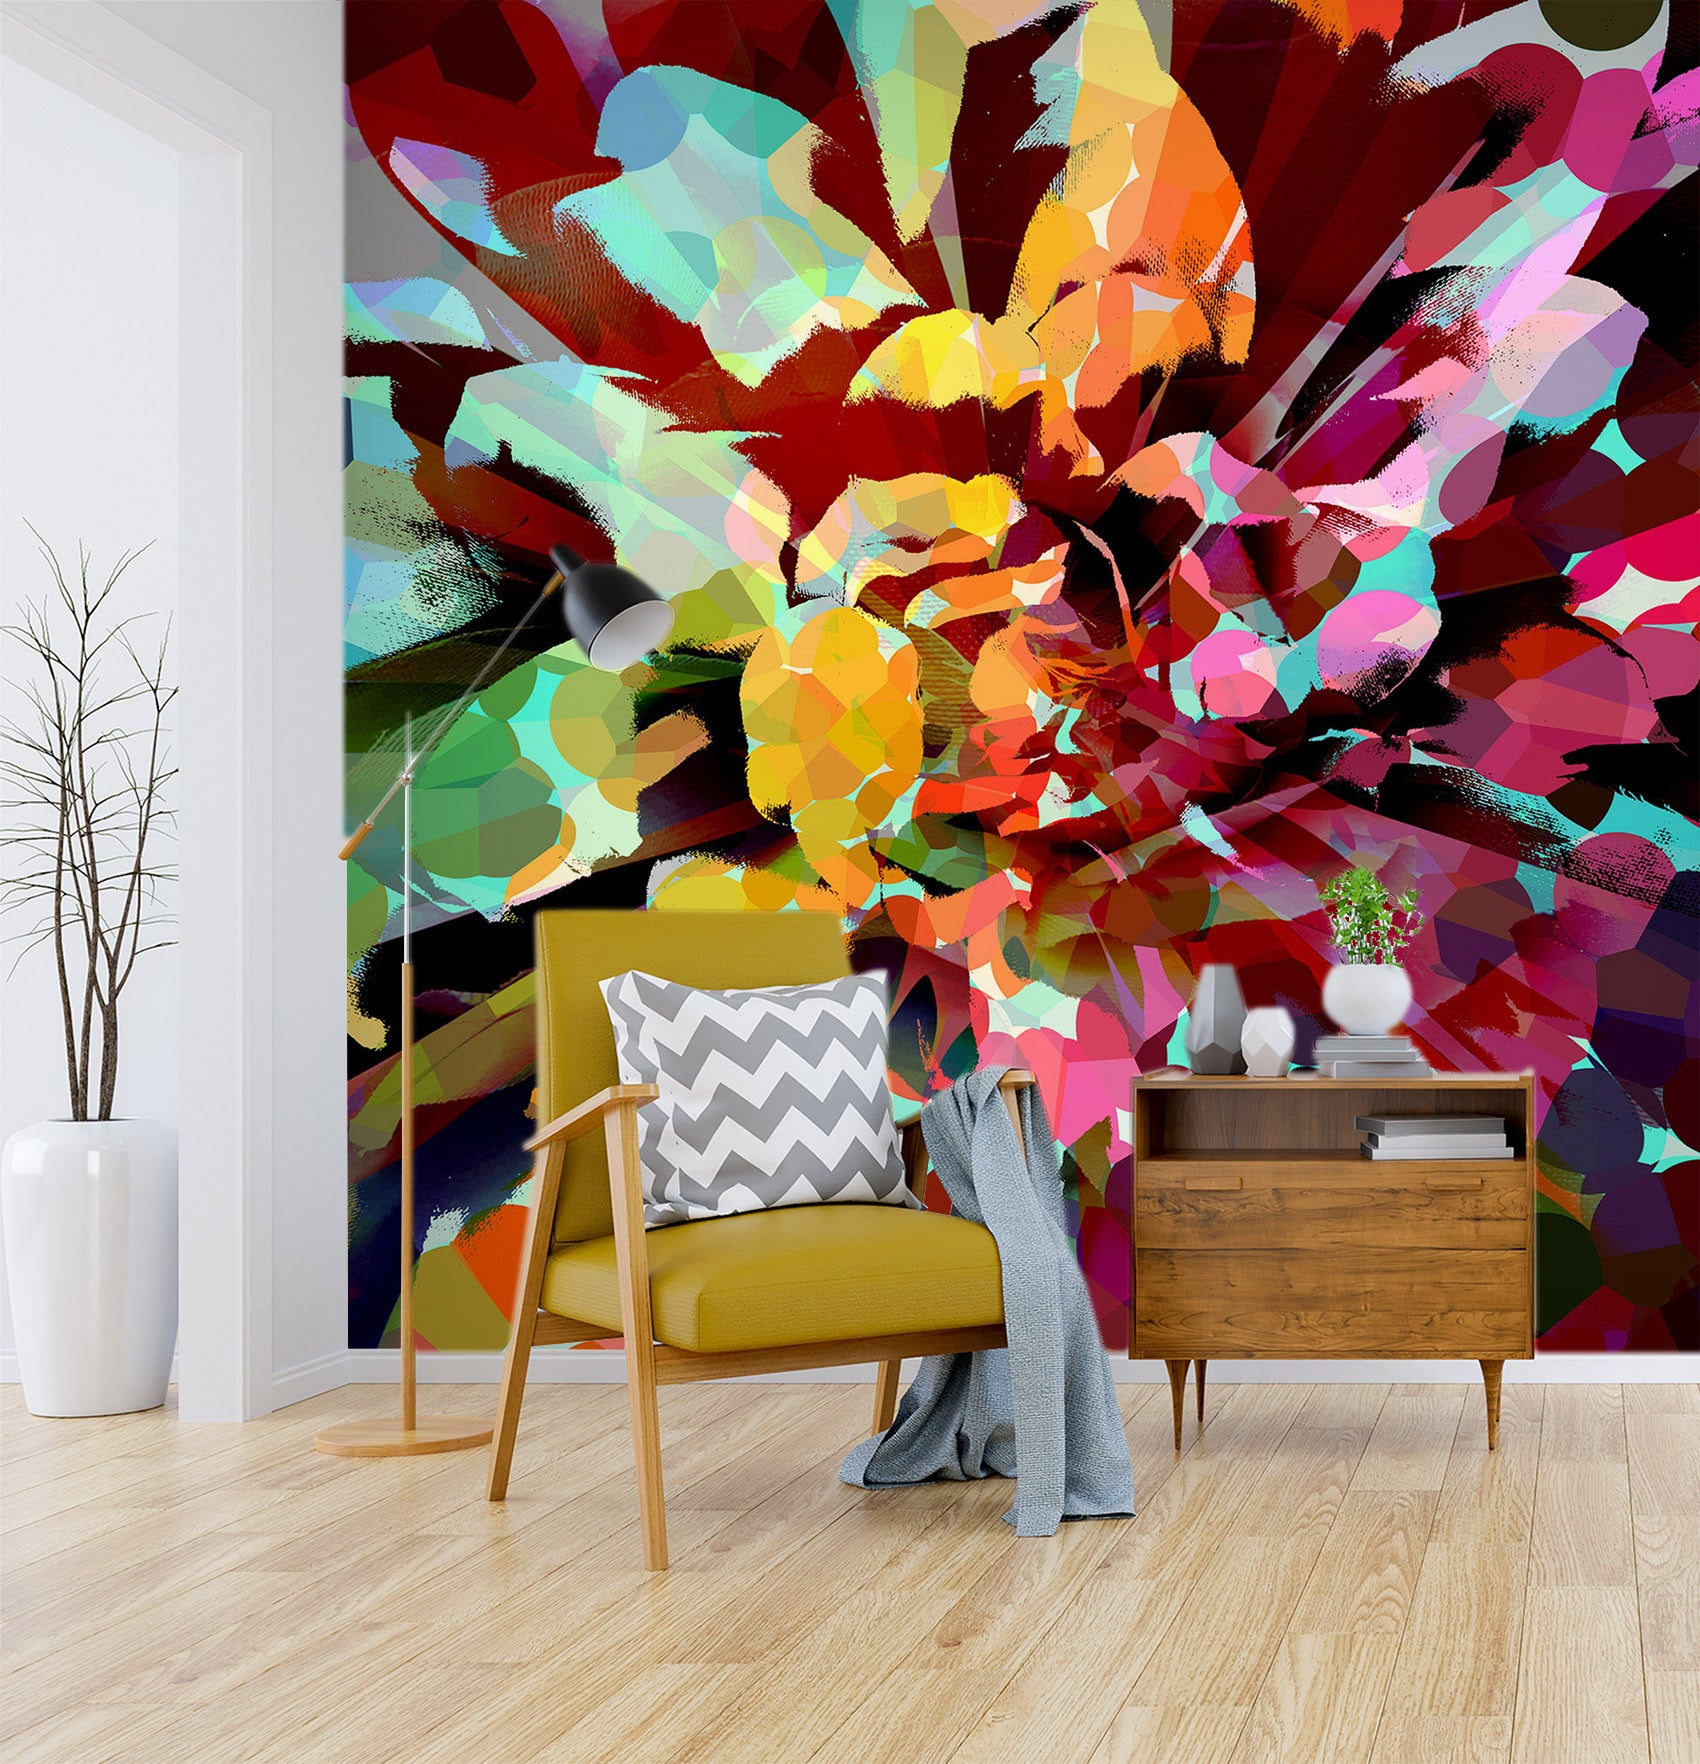 3D Colorful Pattern 19110 Shandra Smith Wall Mural Wall Murals